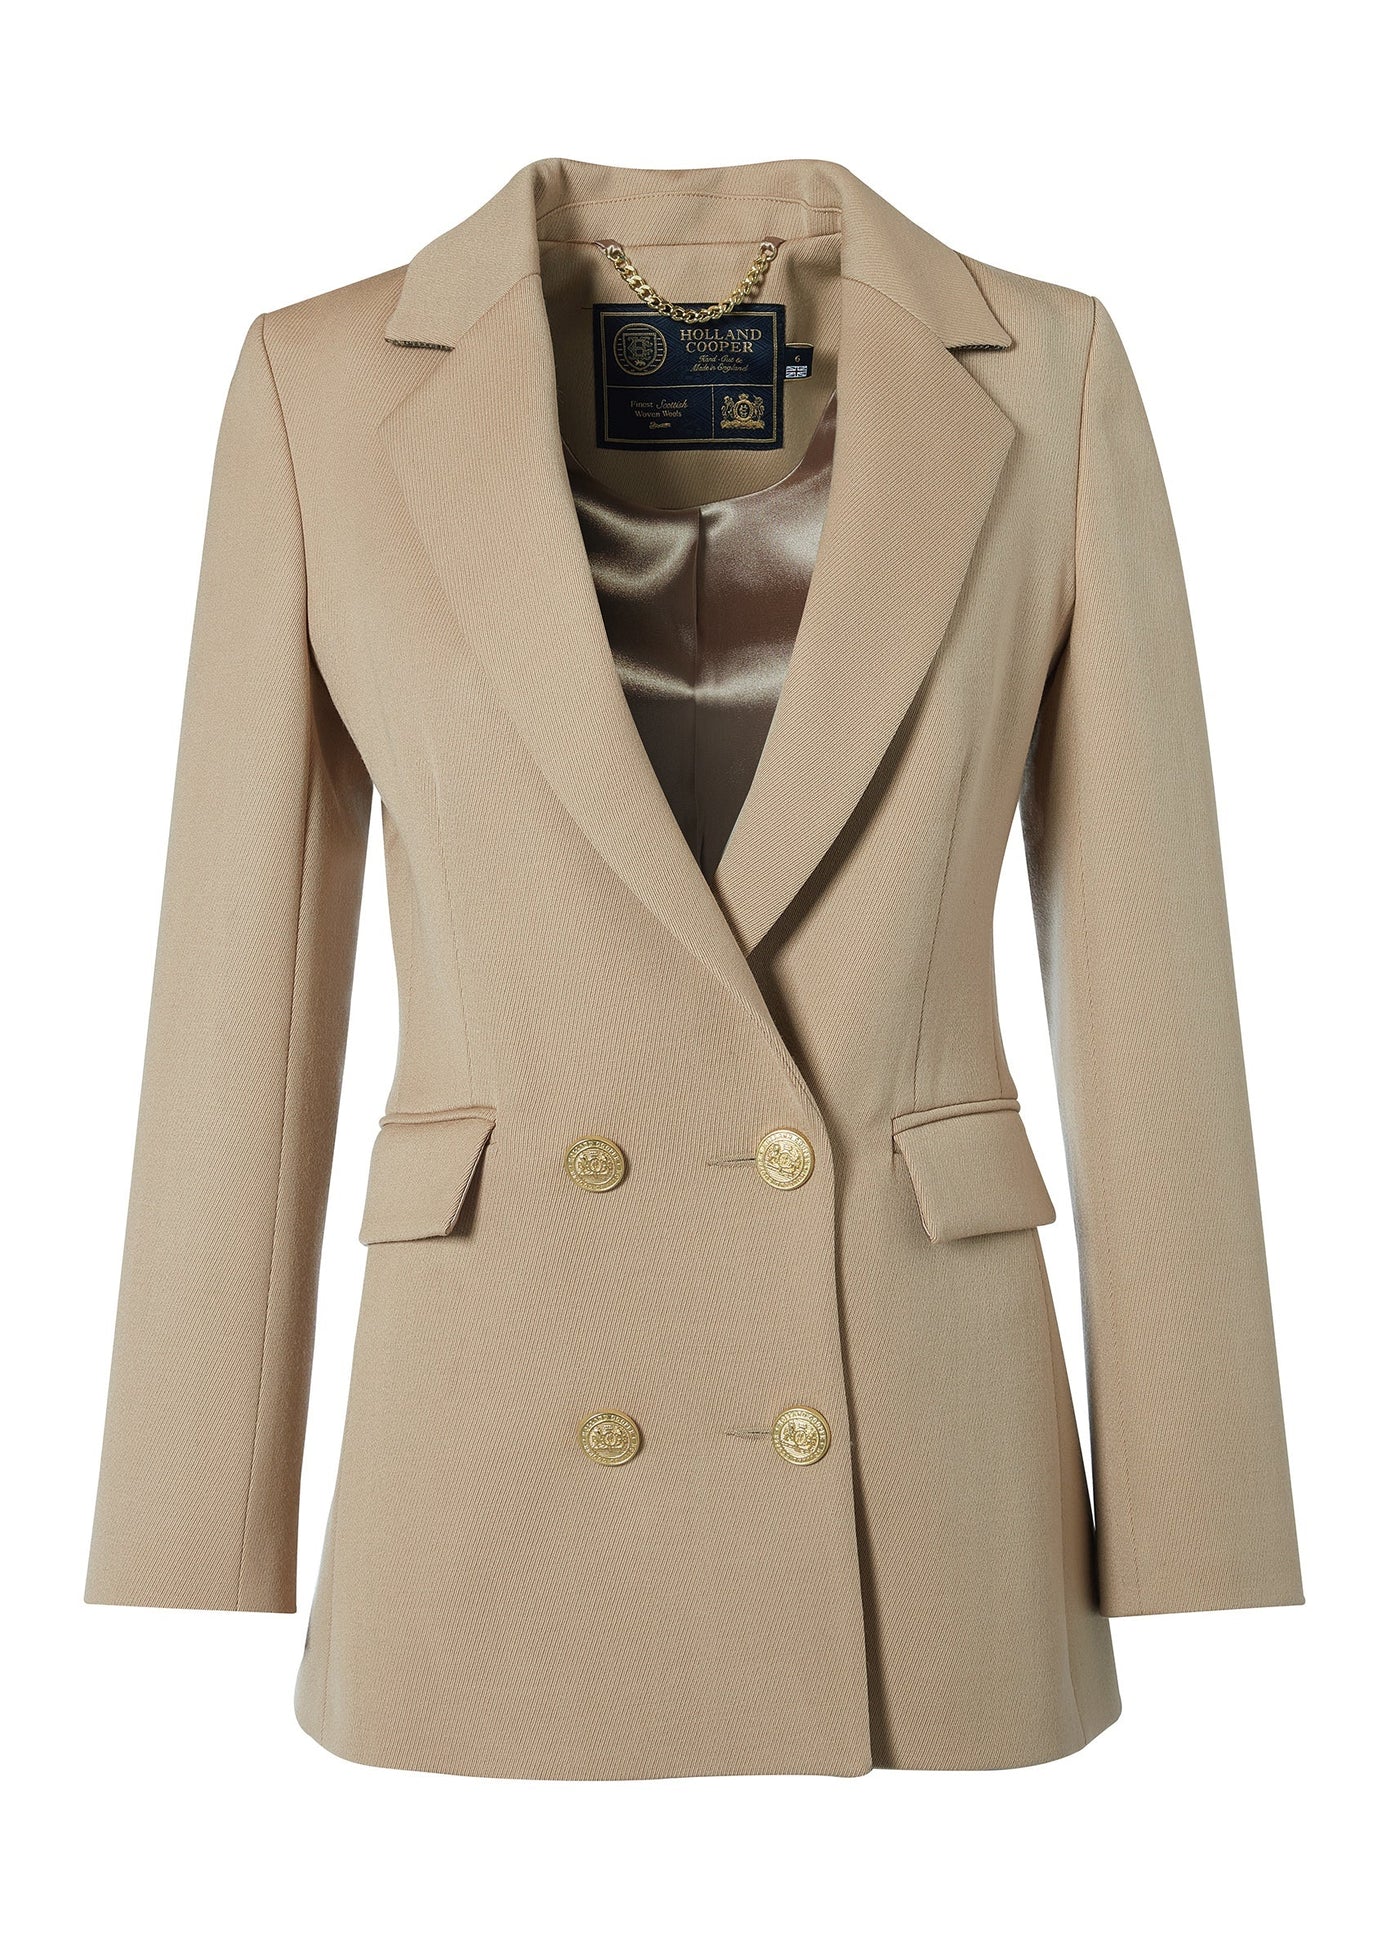 Holland Cooper Double Breasted Ladies Blazer in Camel Twill Front